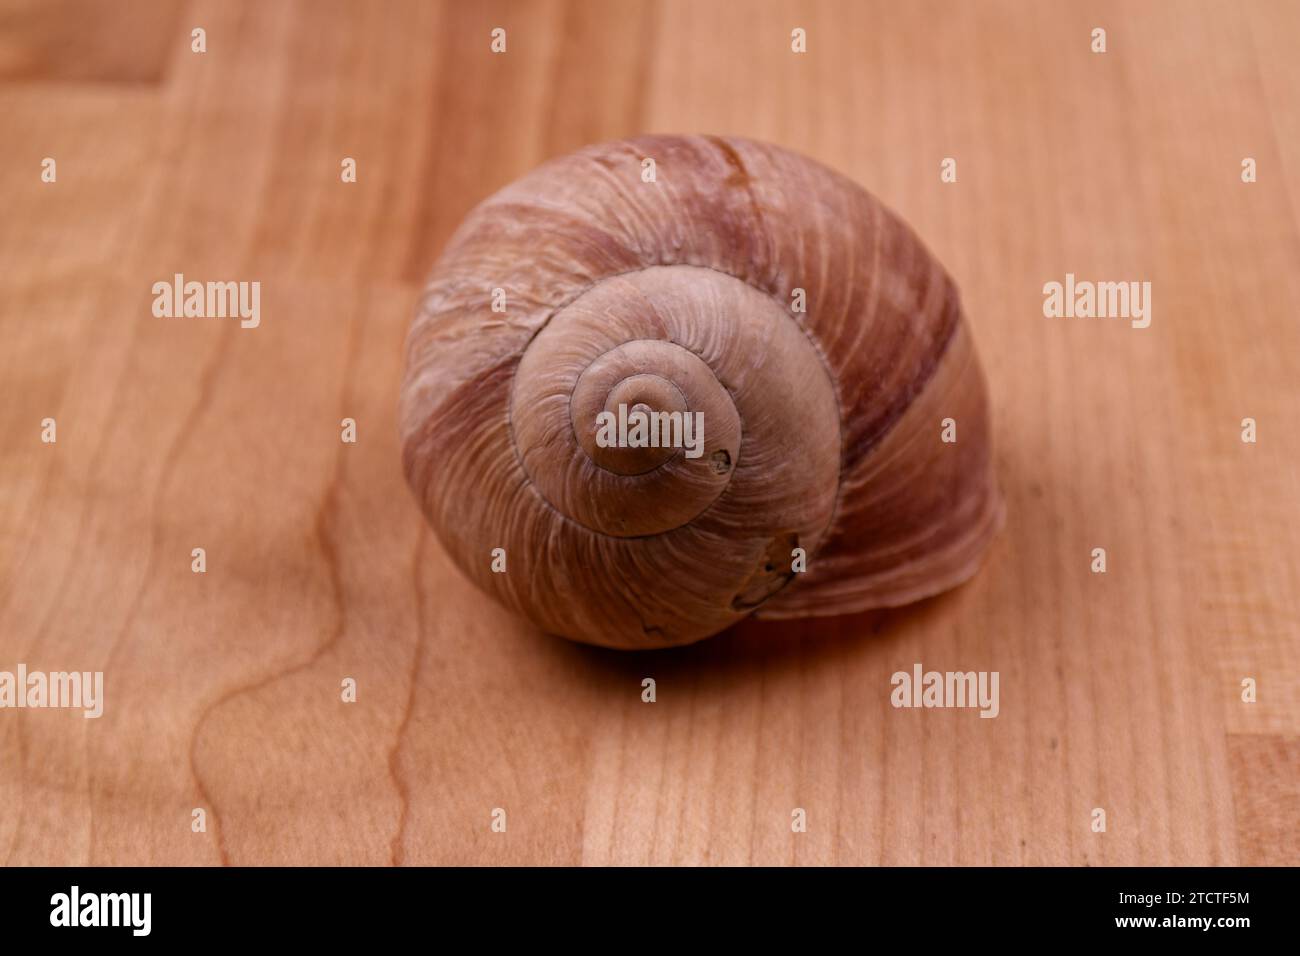 a shimmering snail shell lying on a wooden table, close up image Stock Photo